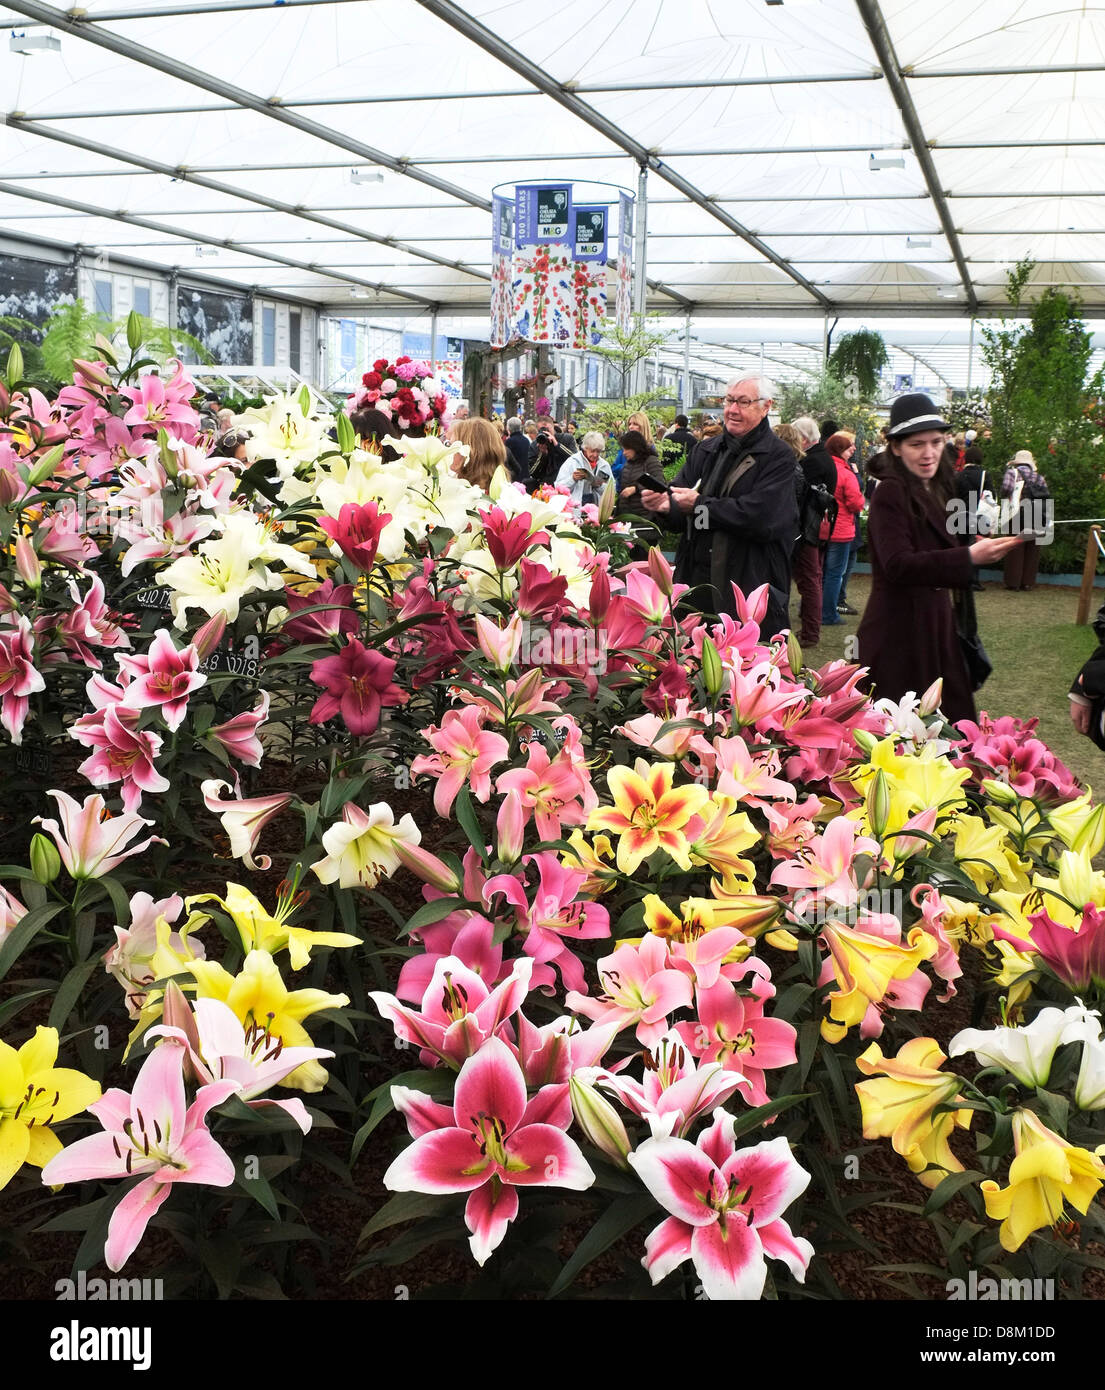 A stunning display of lillies at the Chelsea Flower Show. Stock Photo